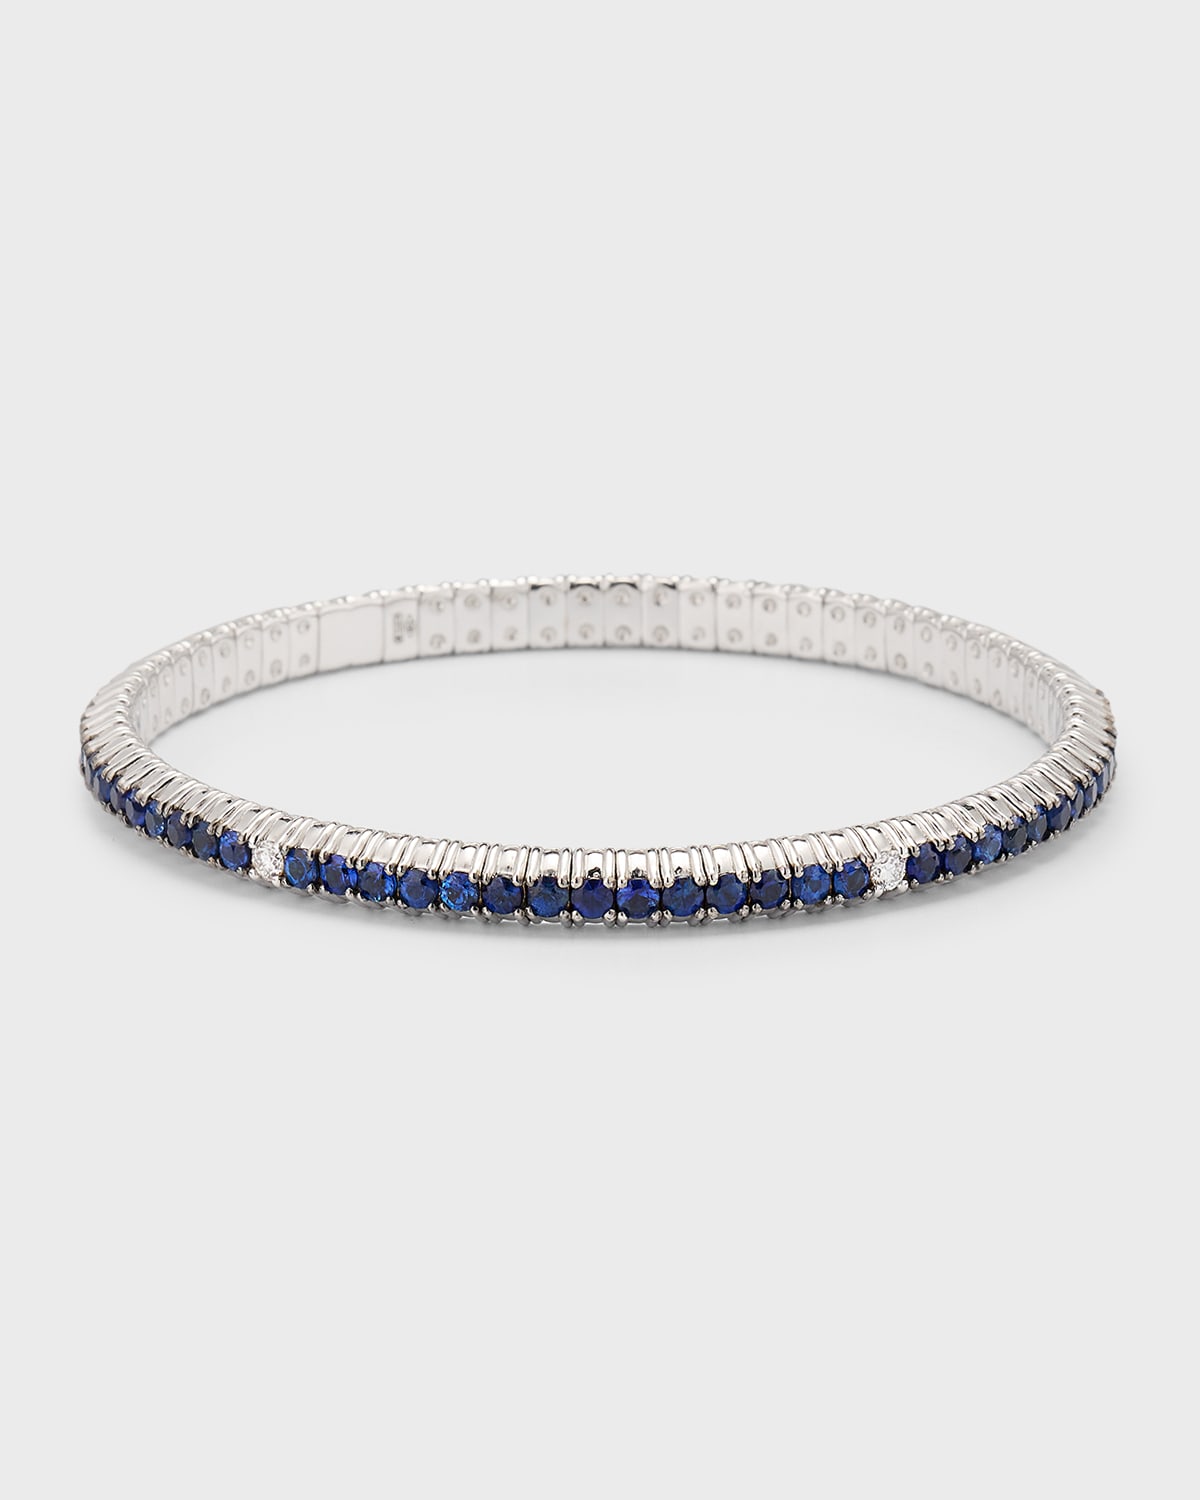 18K White Gold Bracelet with Blue Sapphires and White Diamonds